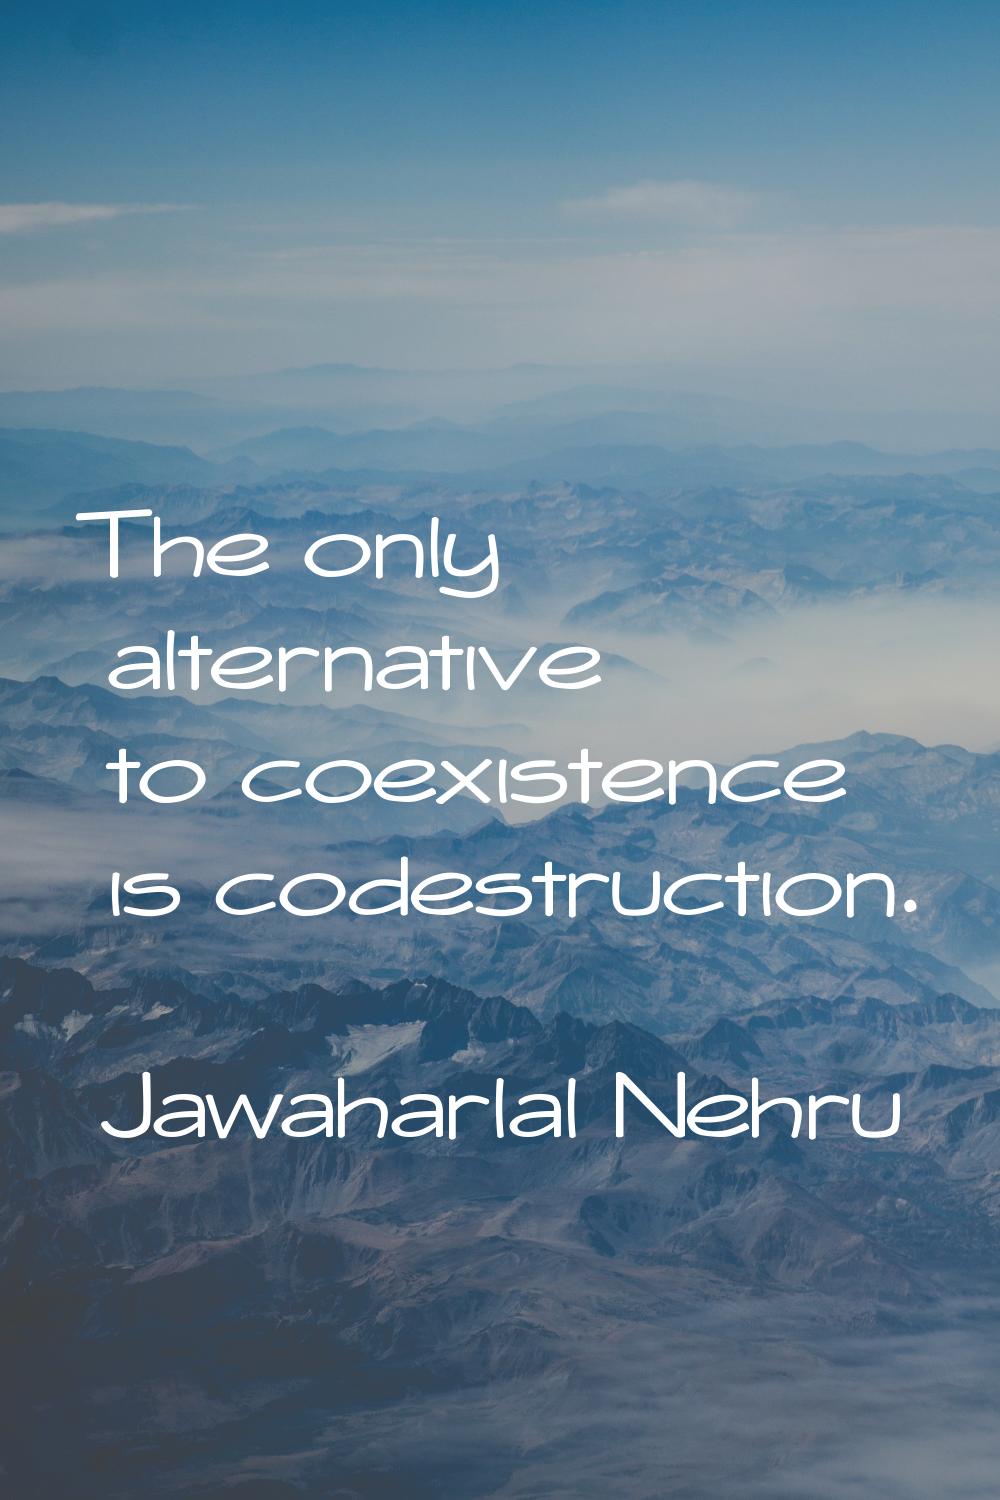 The only alternative to coexistence is codestruction.